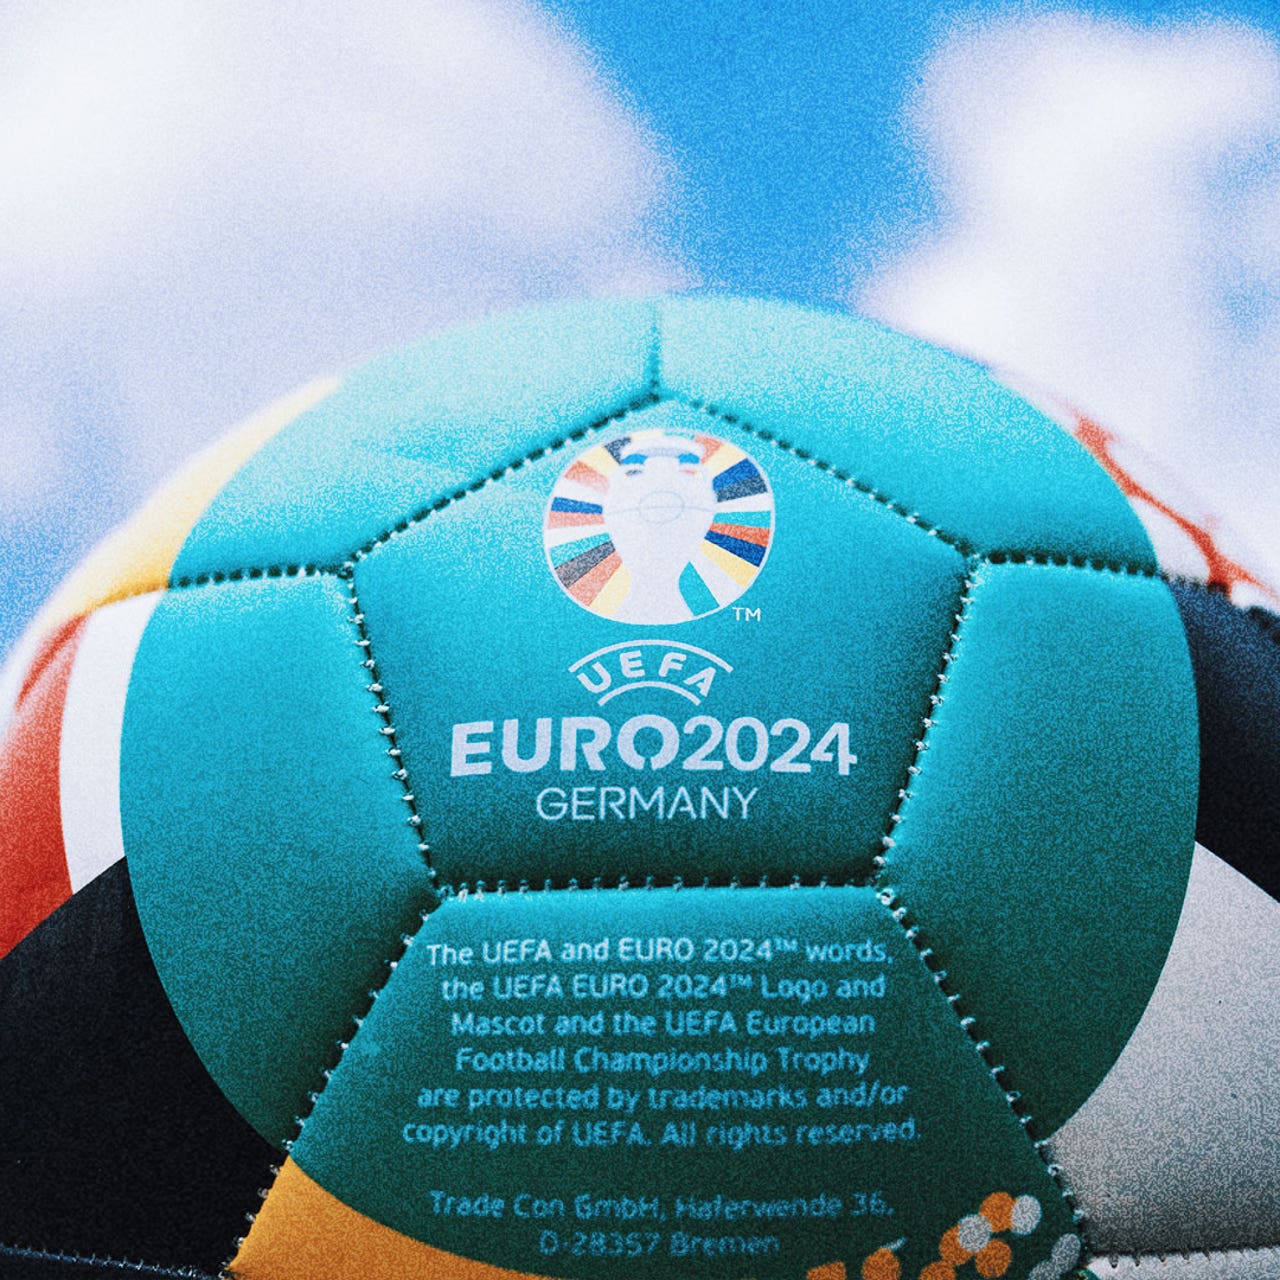 Euro 2024 qualifiers schedule: Dates, times, channels, how to